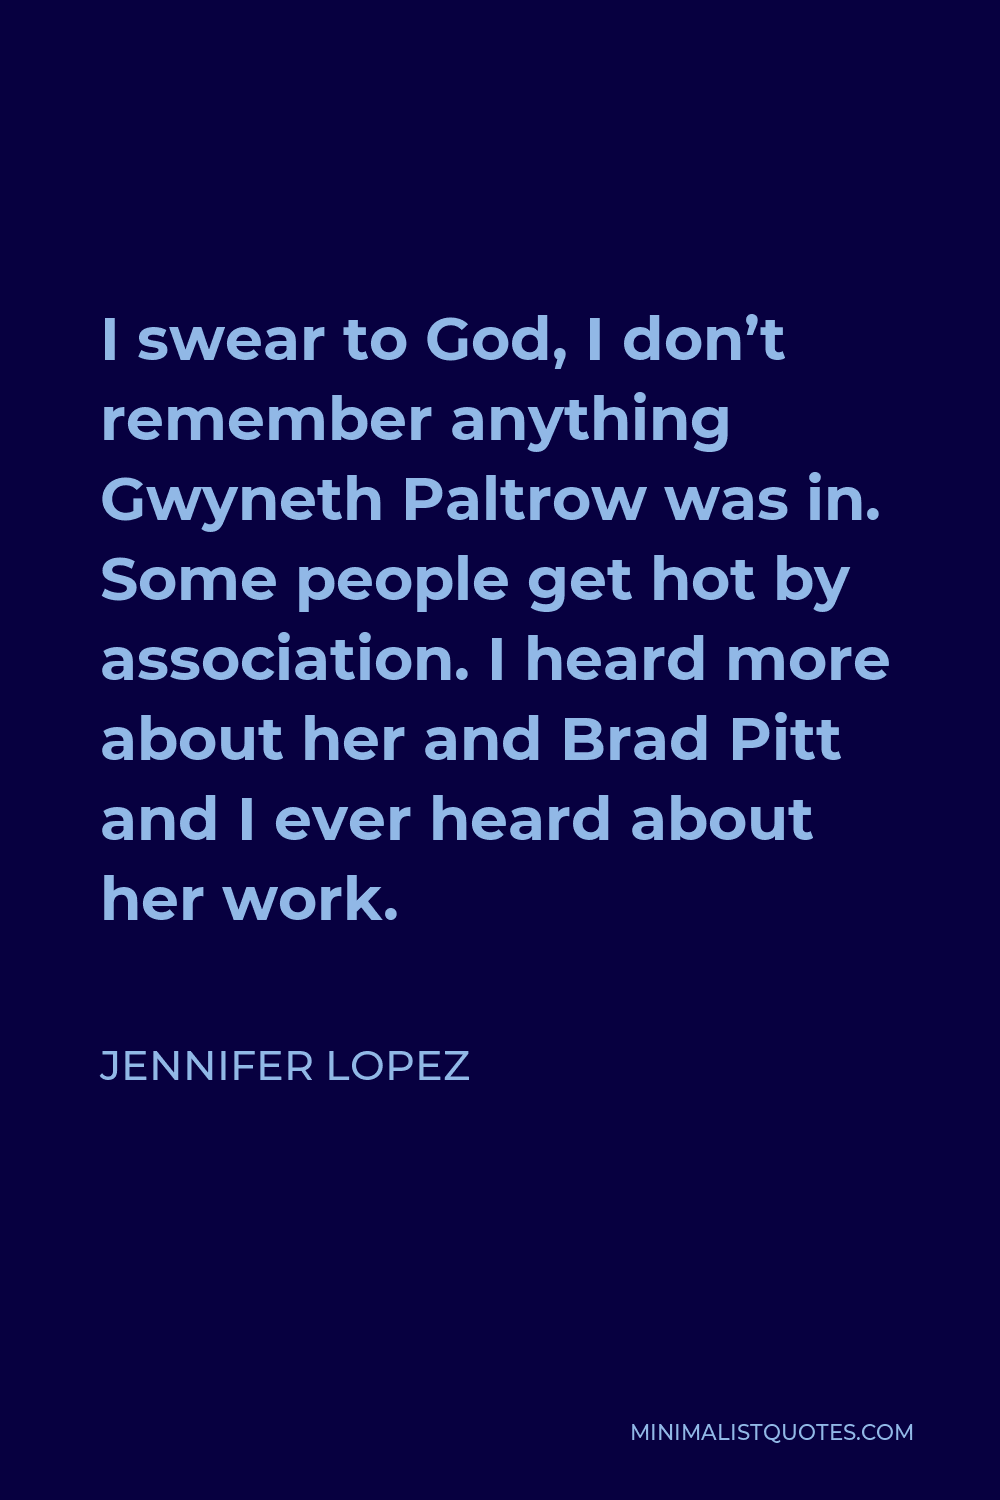 Jennifer Lopez Quote - I swear to God, I don’t remember anything Gwyneth Paltrow was in. Some people get hot by association. I heard more about her and Brad Pitt and I ever heard about her work.